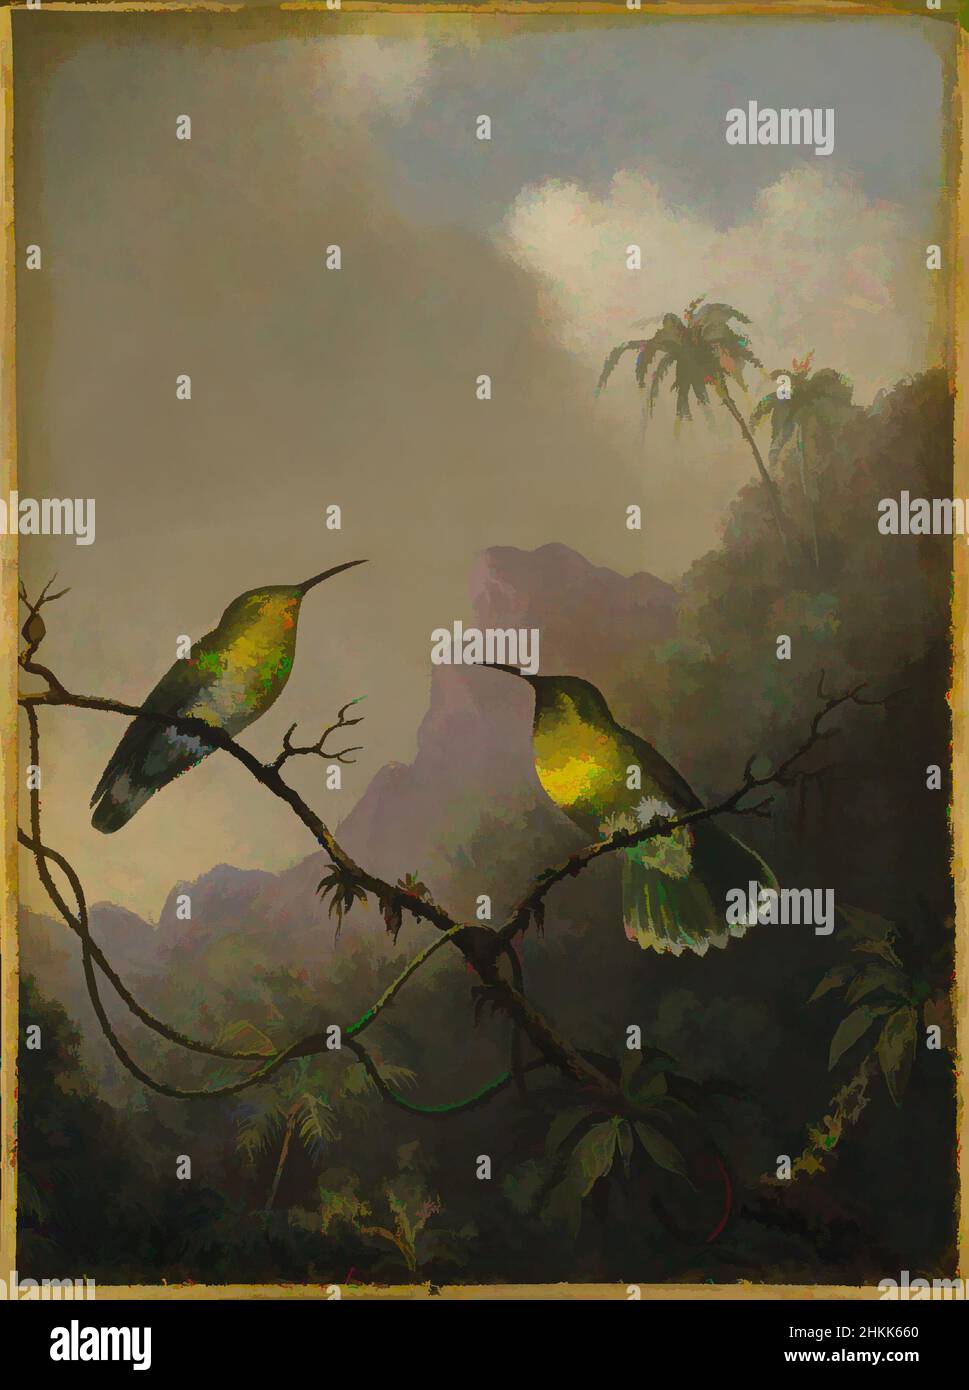 Art inspired by Two Humming Birds: 'Copper-tailed Amazili', Martin Johnson Heade, American, 1819-1904, Oil on canvas, ca.1865-1875, 11 9/16 x 8 7/16 in., 29.3 x 21.5 cm, American Painting, animal, birds, branches, clouds, Copper-tailed Amzaiii, humming birds, hummingbirds, Johnson Heade, Classic works modernized by Artotop with a splash of modernity. Shapes, color and value, eye-catching visual impact on art. Emotions through freedom of artworks in a contemporary way. A timeless message pursuing a wildly creative new direction. Artists turning to the digital medium and creating the Artotop NFT Stock Photo